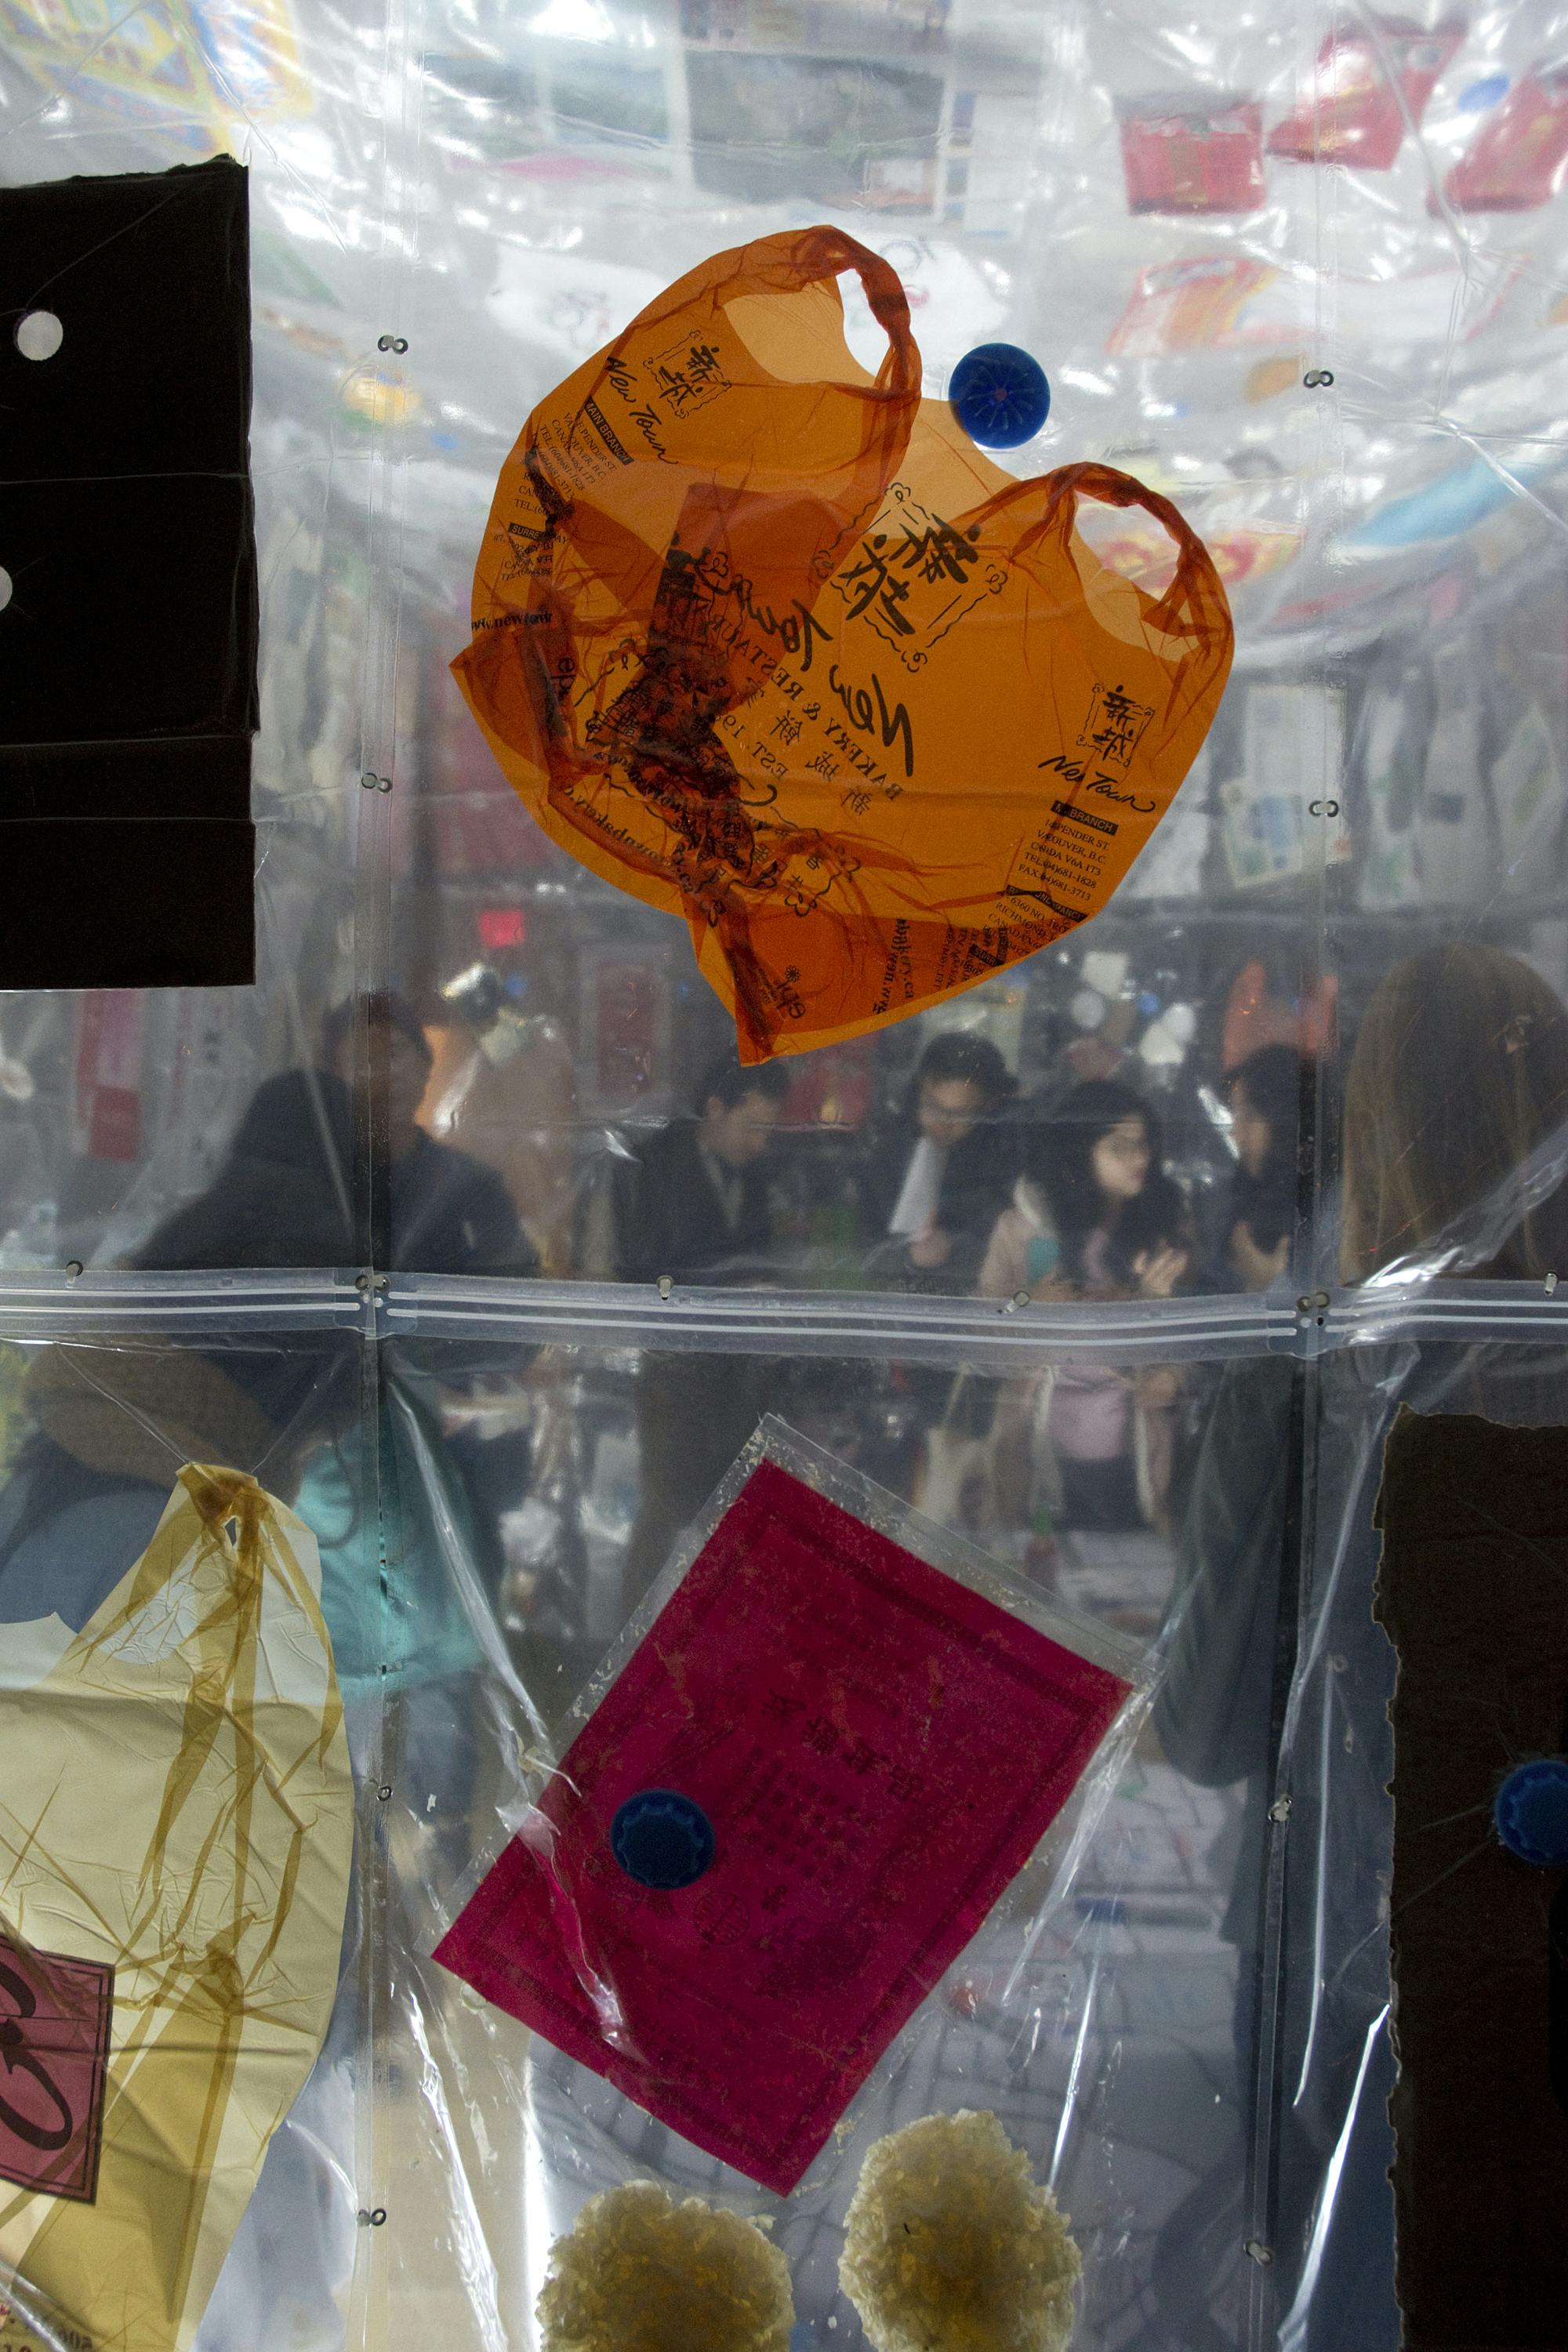 Various items including plastic shopping bags are vacuumed sealed in clear bags. People are visible through the clear bags.